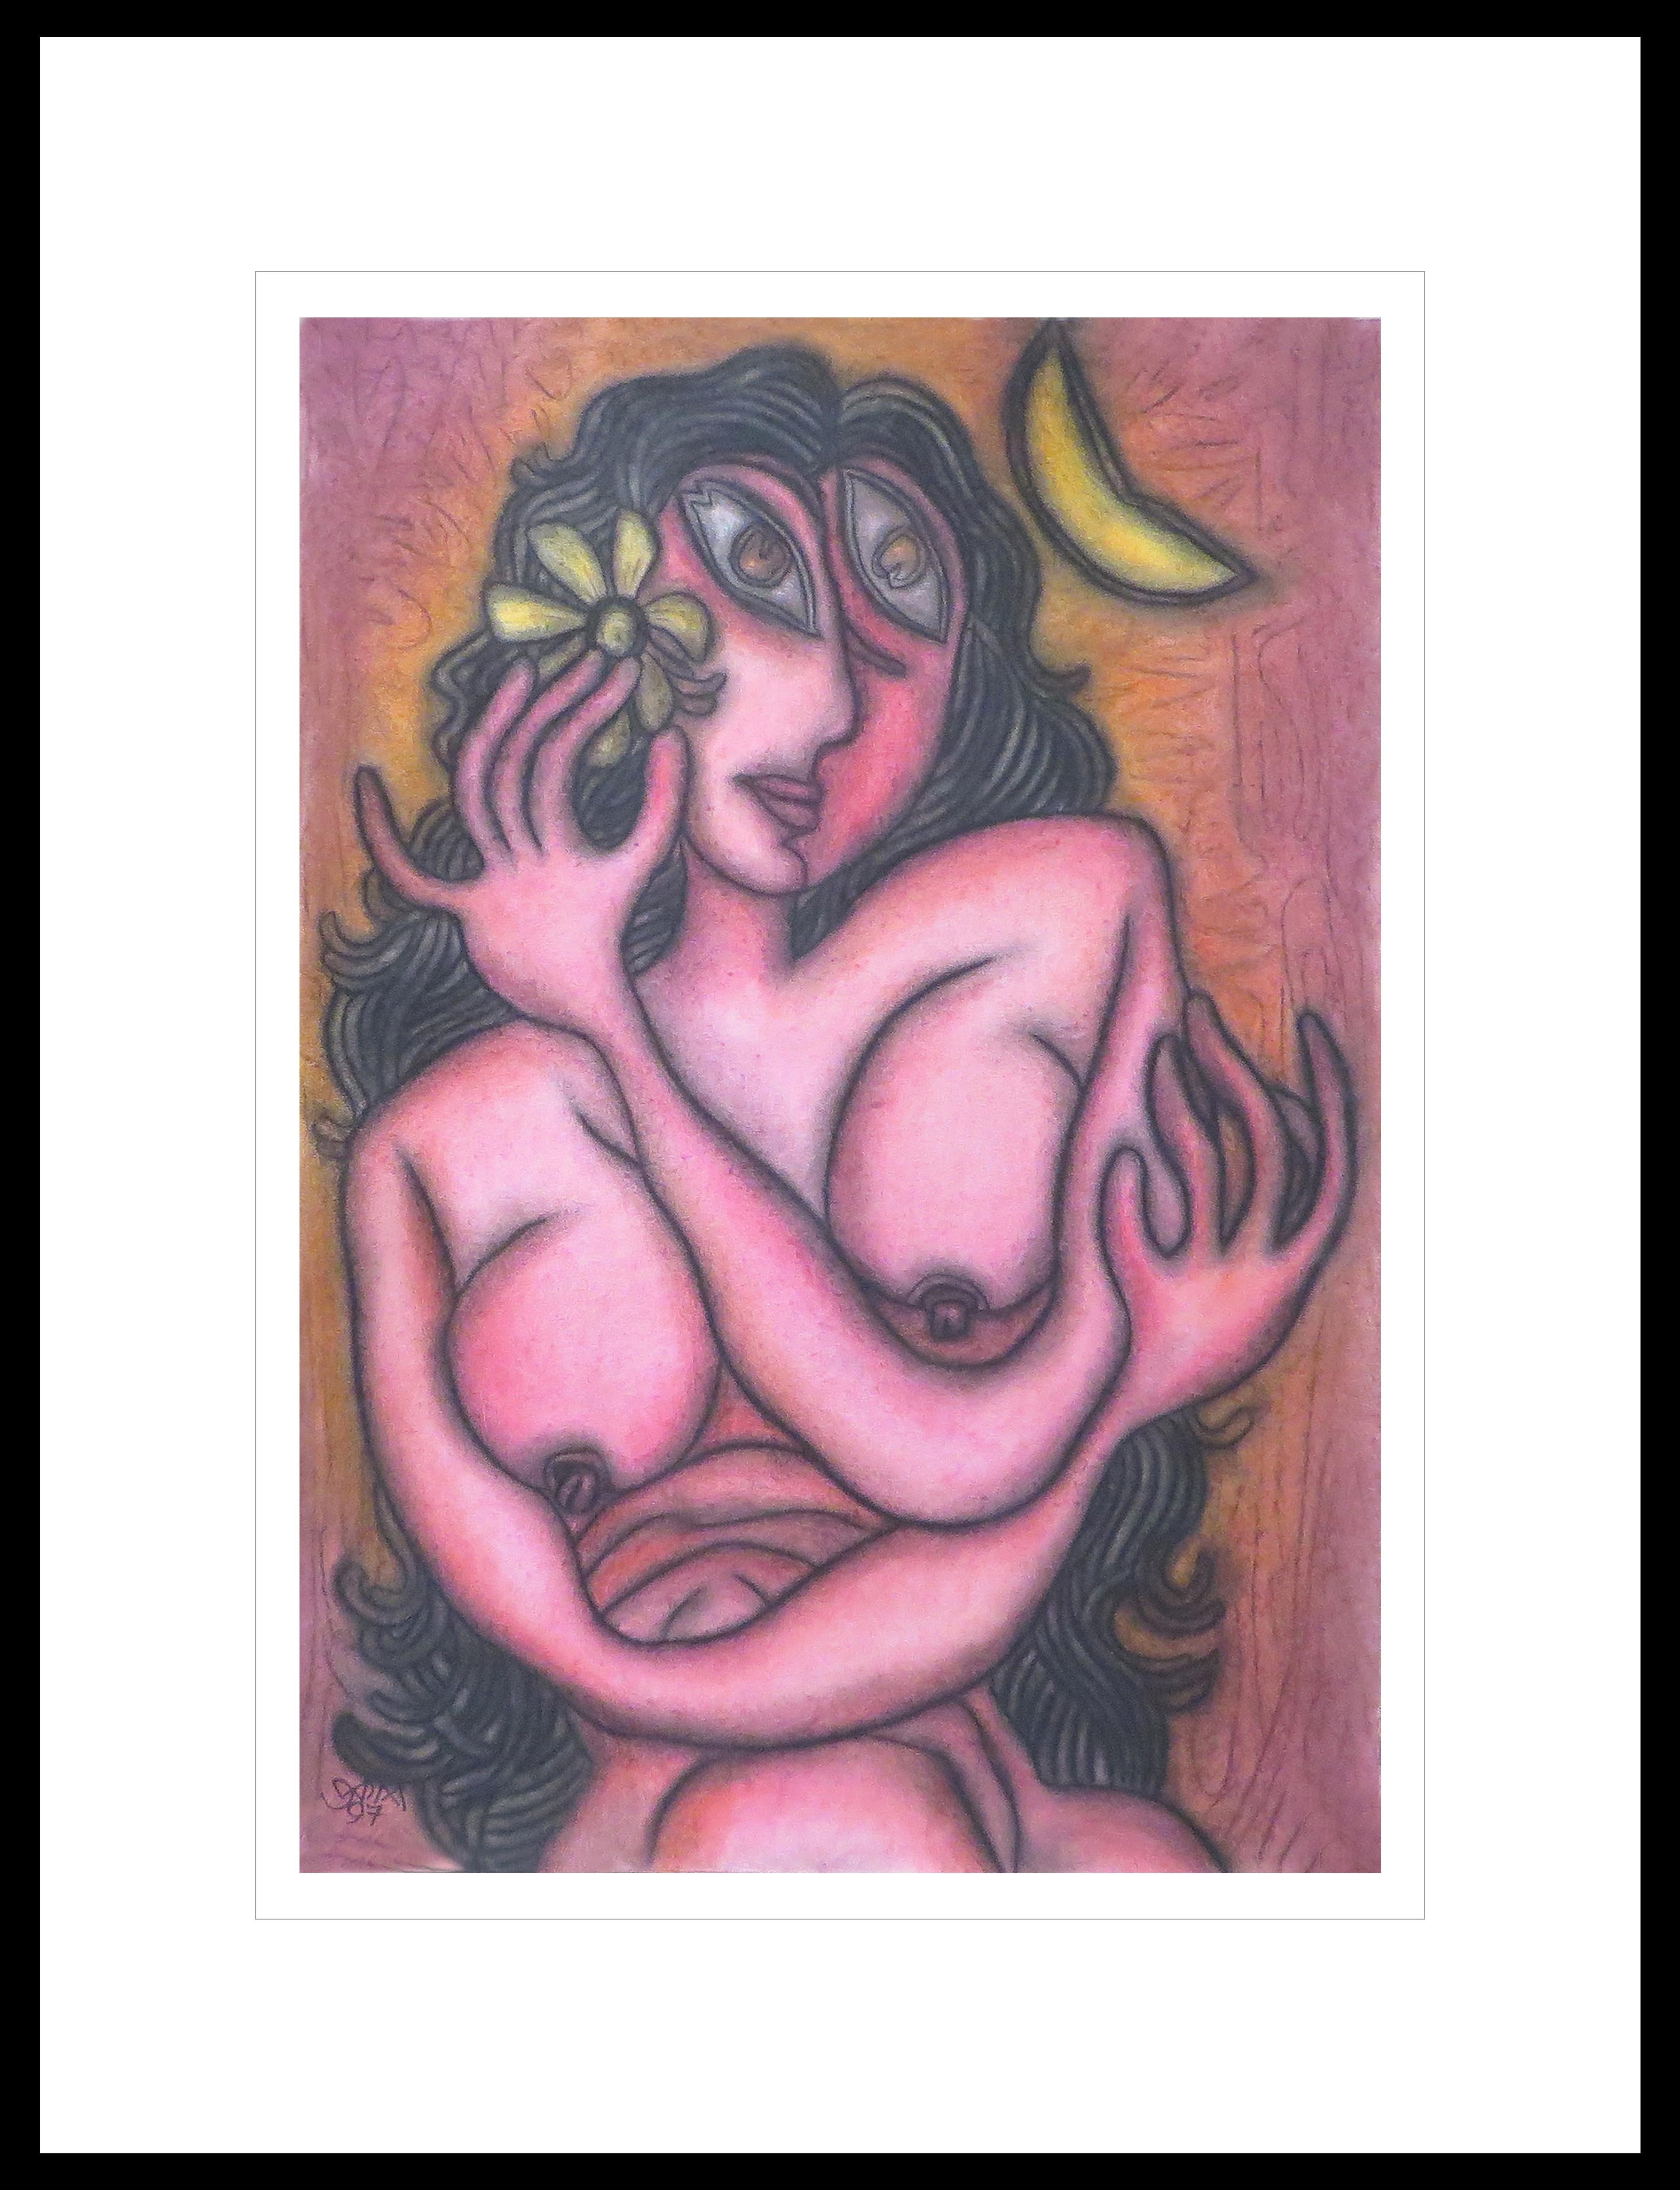 Prokash Karmakar Nude Painting - Nude Woman with Flower, Pastel on Board, Pink, Green, Indian Artist "In Stock"